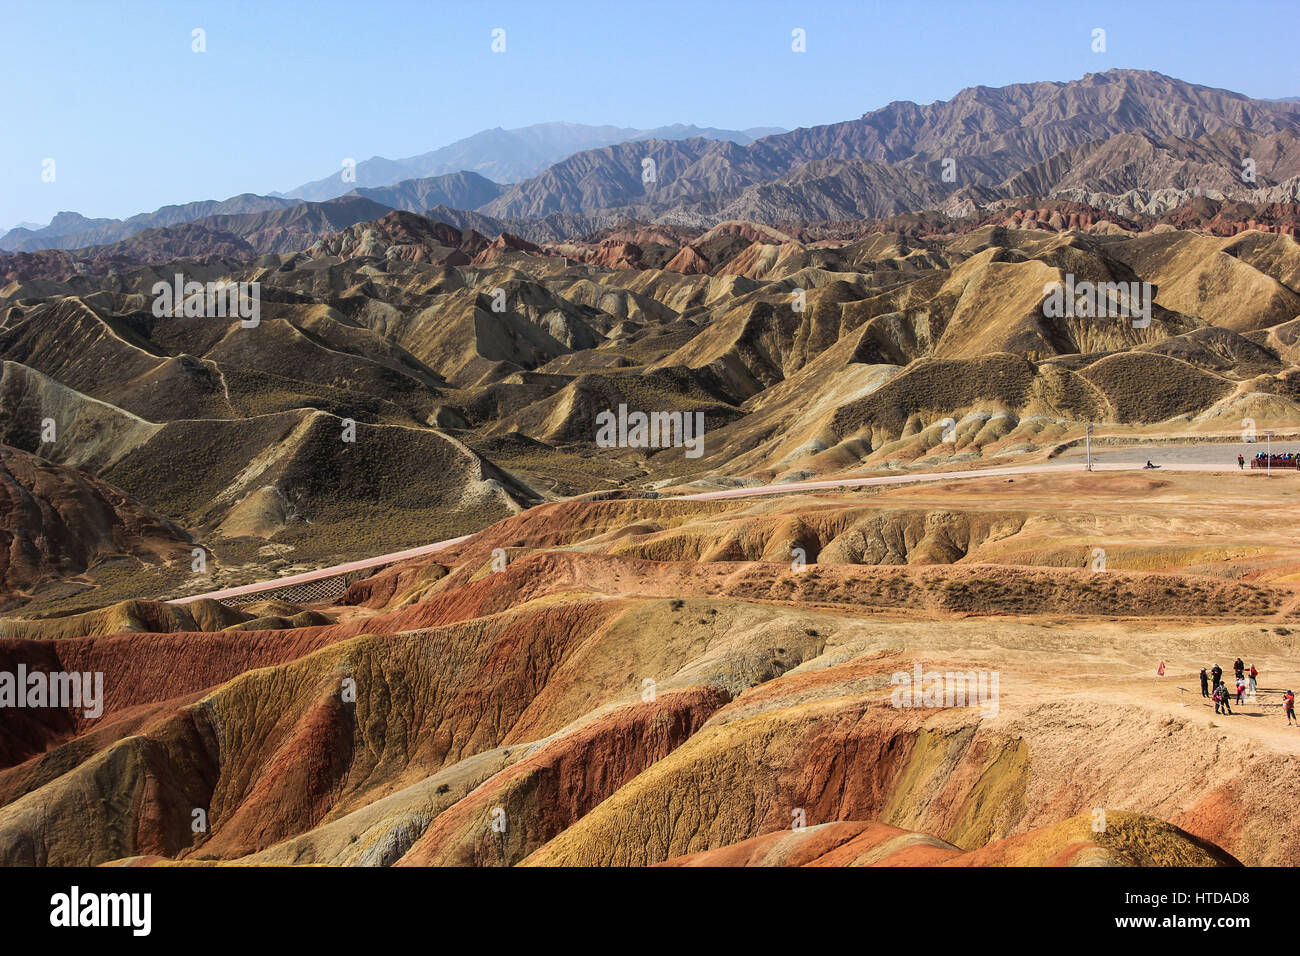 Zhangye, China. 10th Mar, 2017. Zhangye Danxia Landform Geographical Park, listed as UNESCO World Heritage Site in 2009, is located in Zhangye, northwest China's Gansu Province. Zhangye Danxia Landform is famous for the spectacular colorful mountain range of rock formation with mixed colors of red, yellow, blue, white, green. It took more than 24 million years of arduous deposition of mineral settlings with different colors to form layers. Credit: SIPA Asia/ZUMA Wire/Alamy Live News Stock Photo